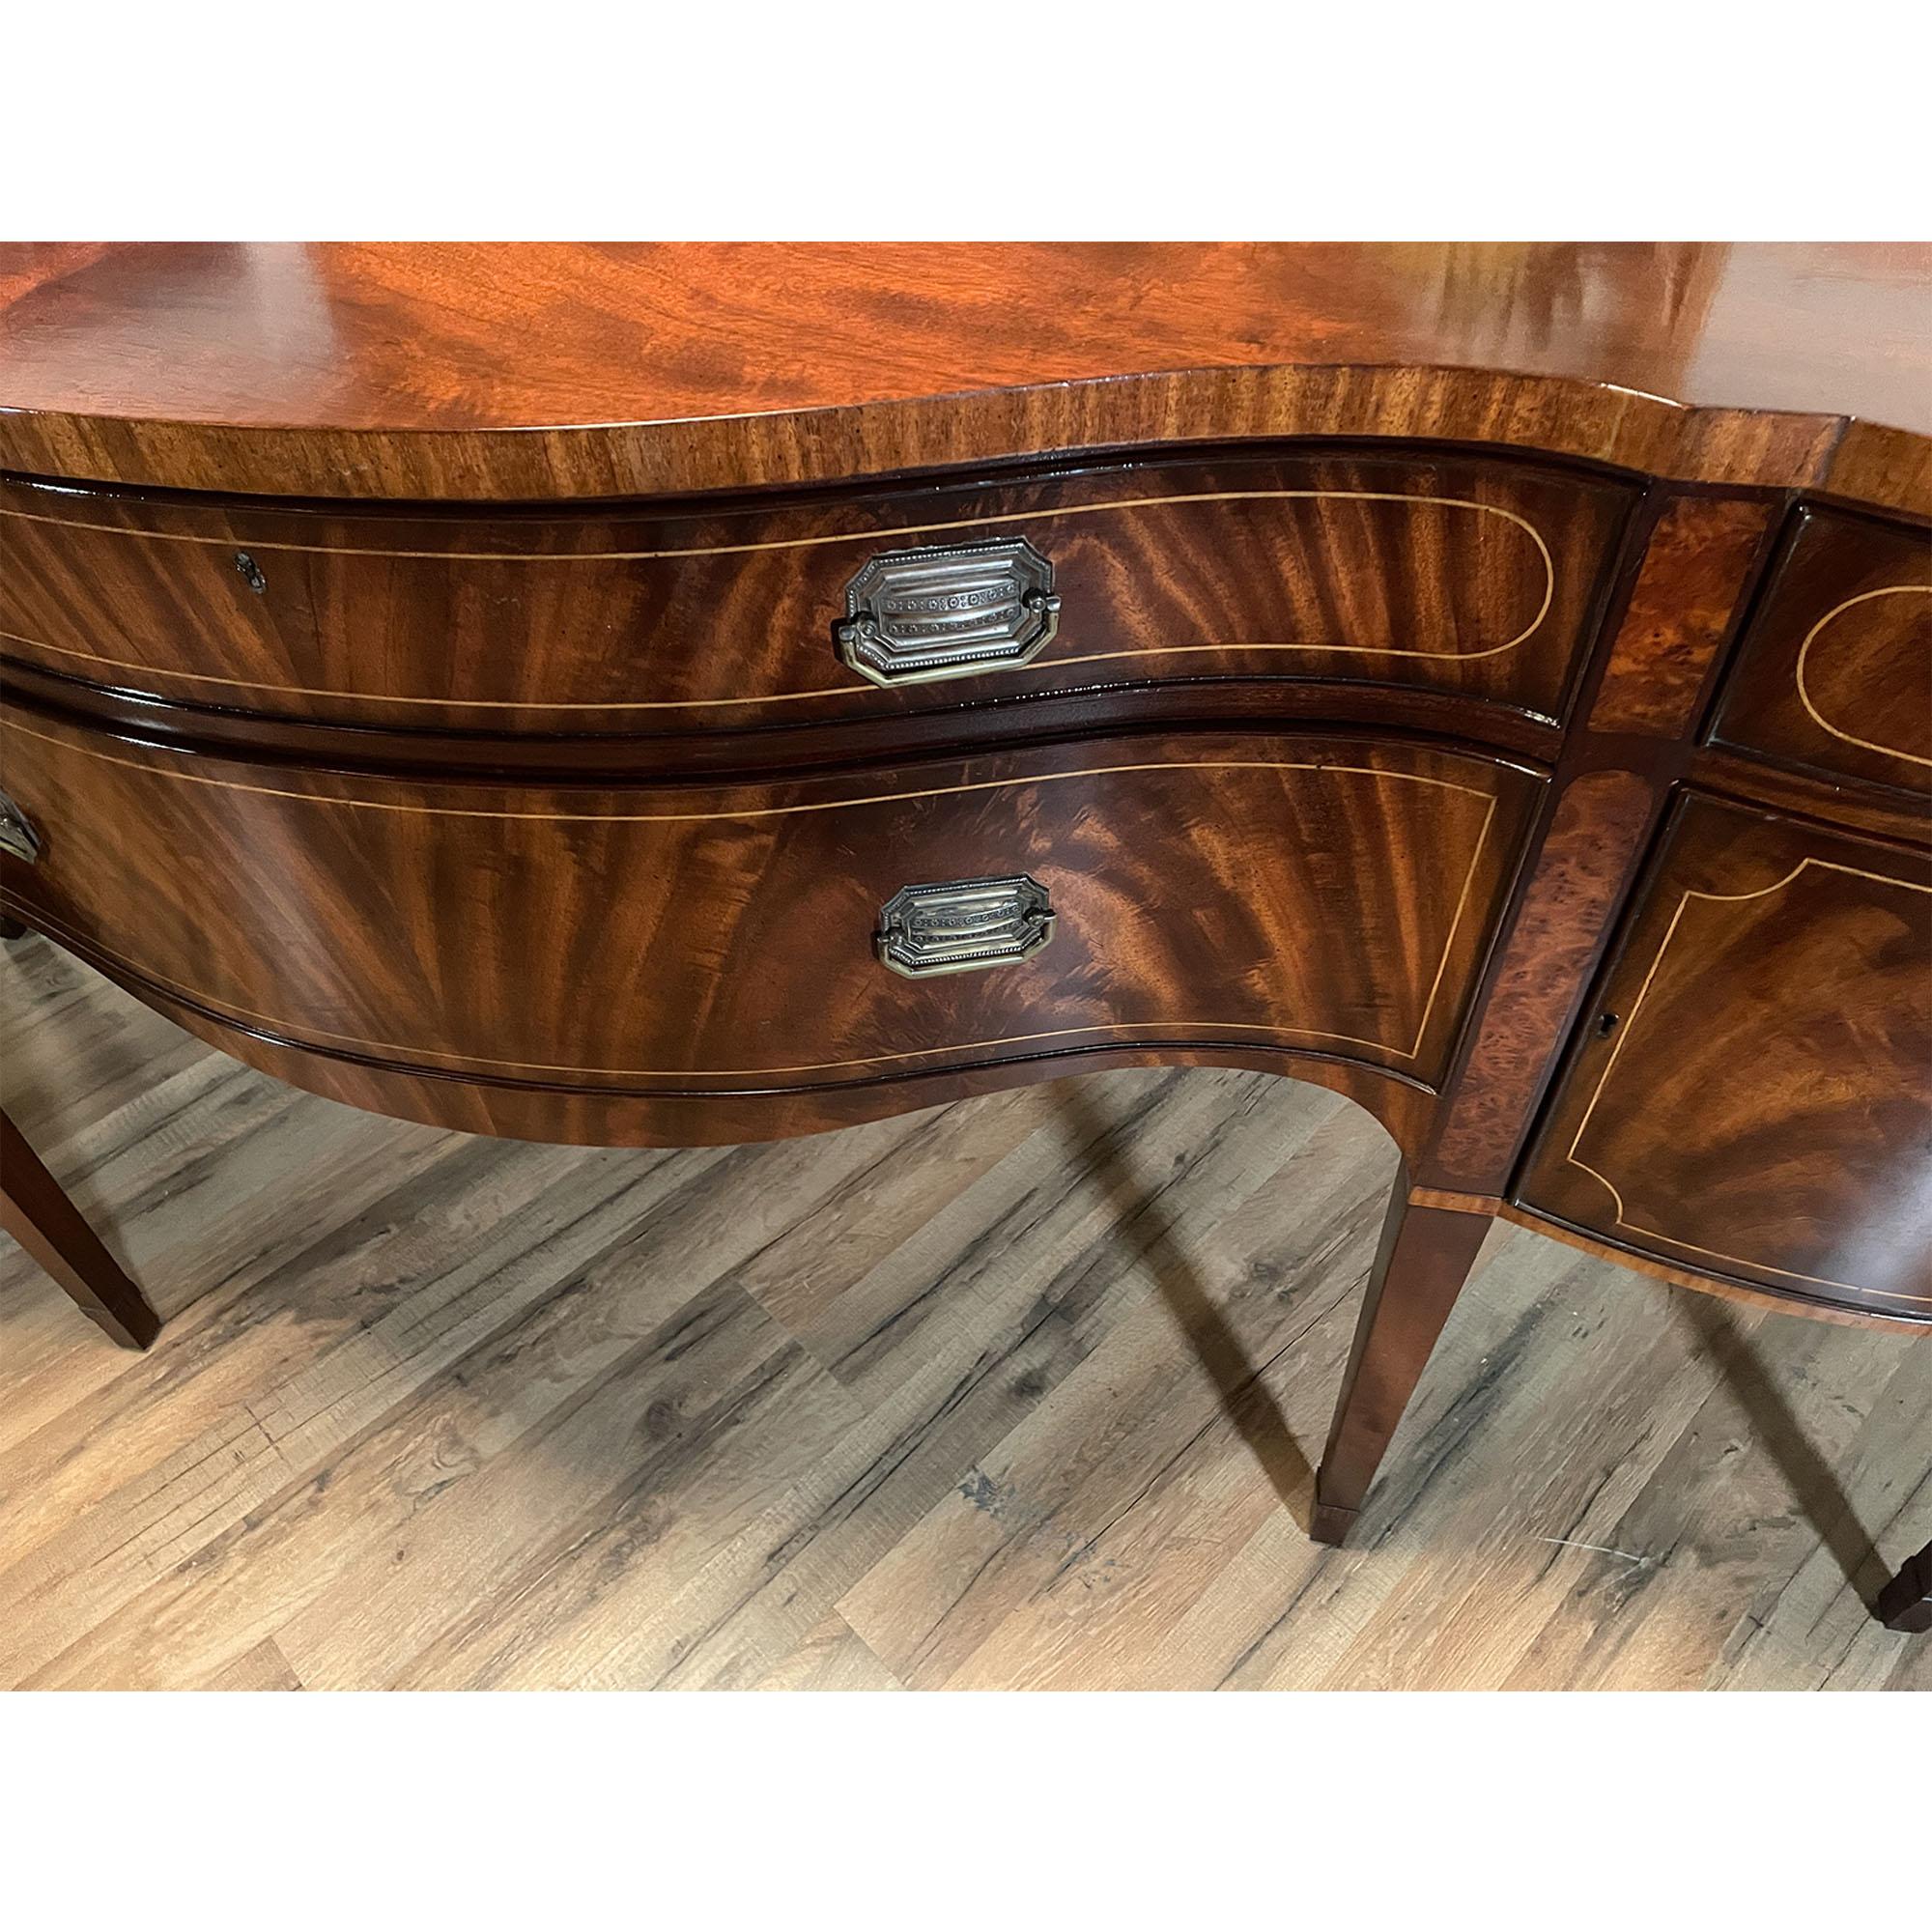 Mid-20th Century Vintage Schmieg and Kotzian Sideboard For Sale